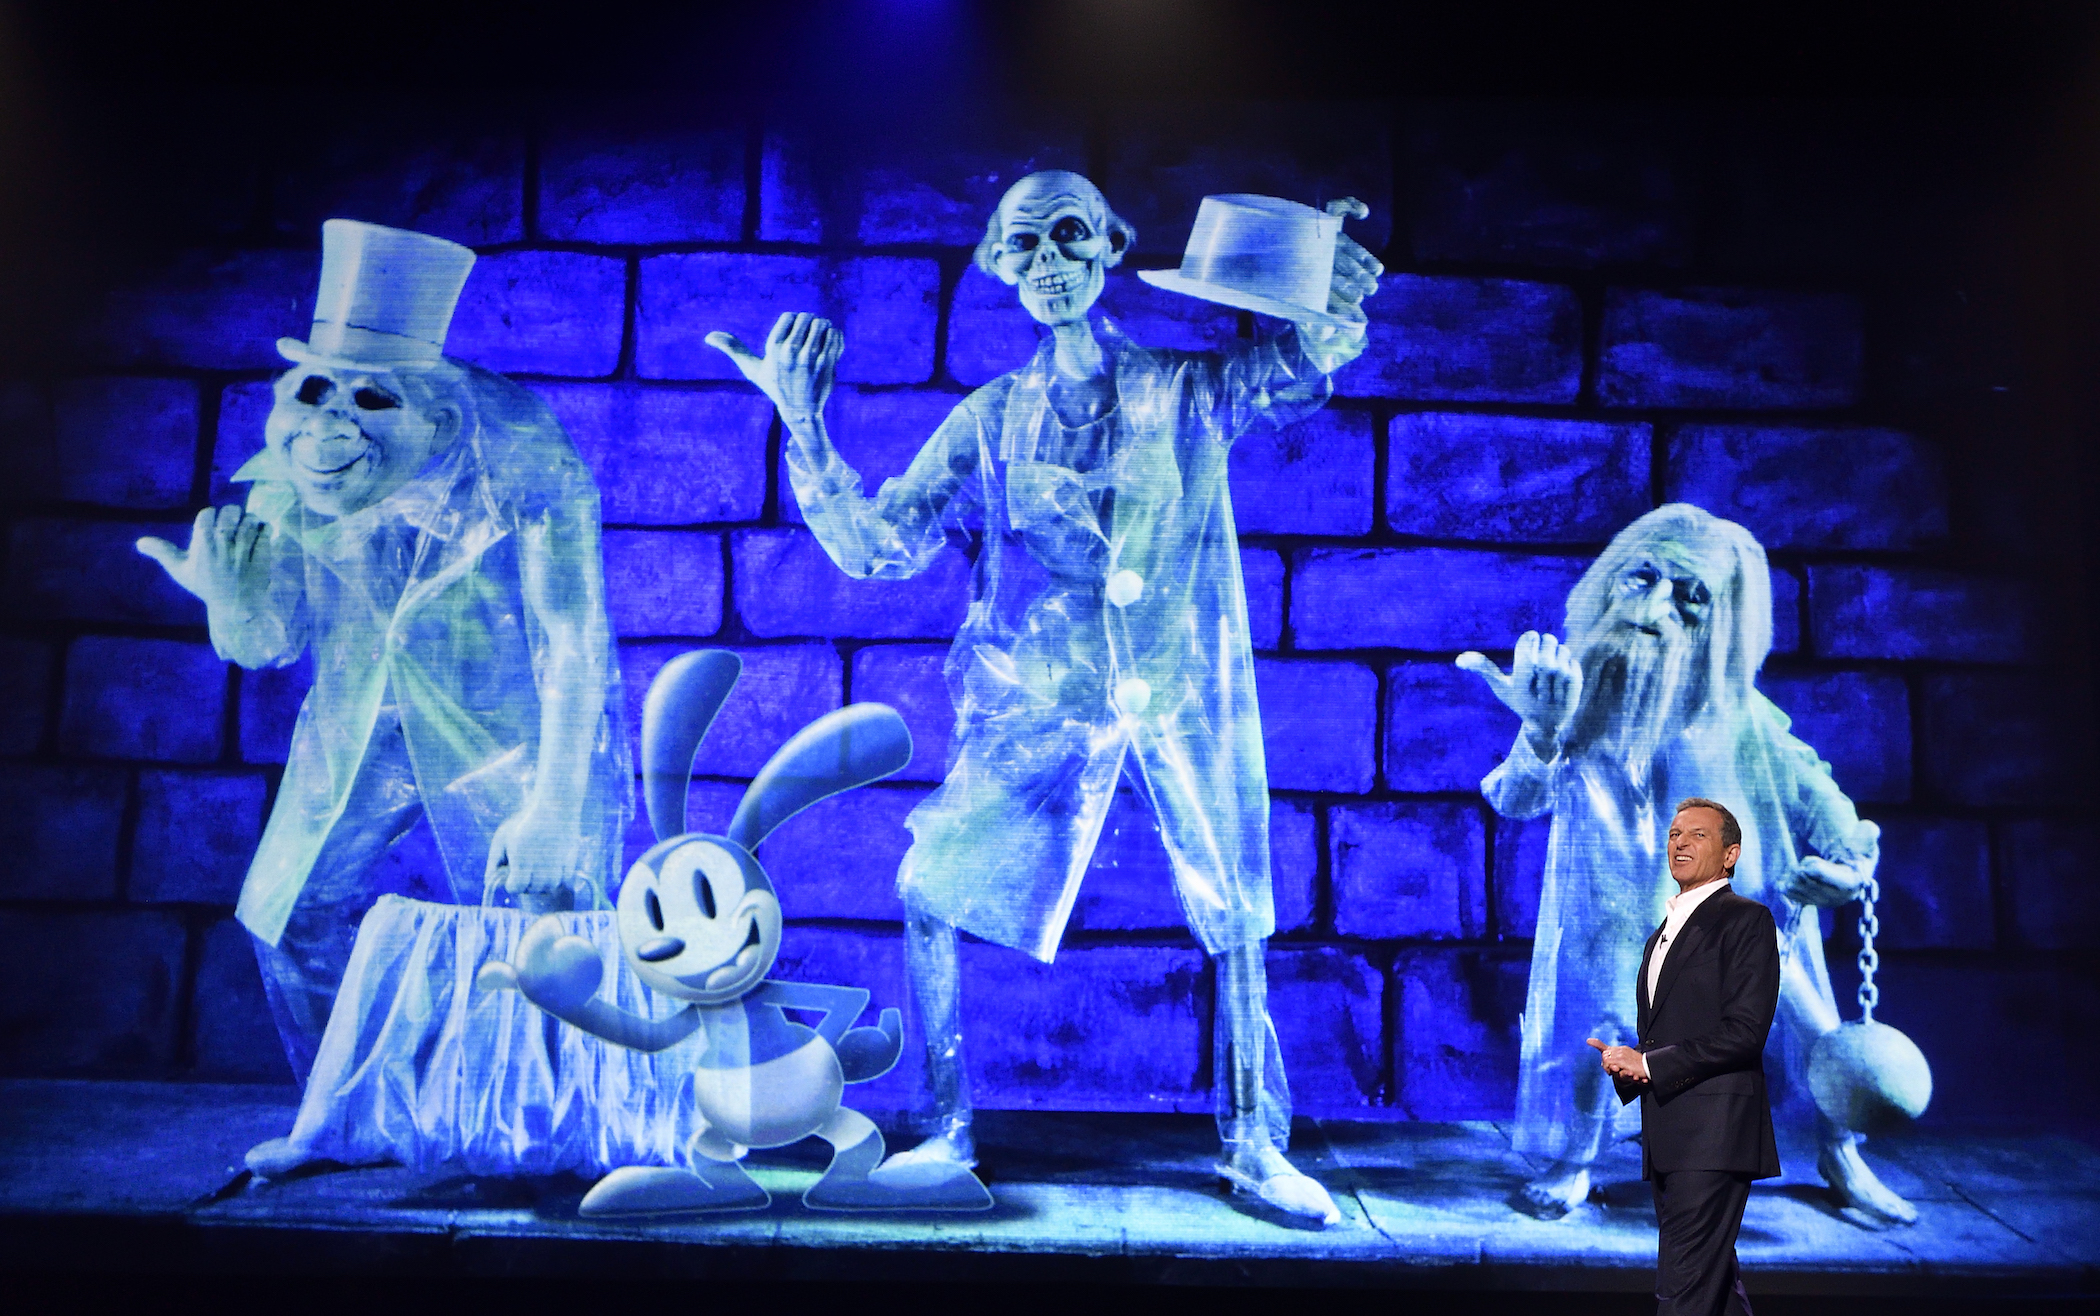 Former Disney CEO Bob Eiger presenting a ghostly screen of the Disney Parks Haunted Mansion ride